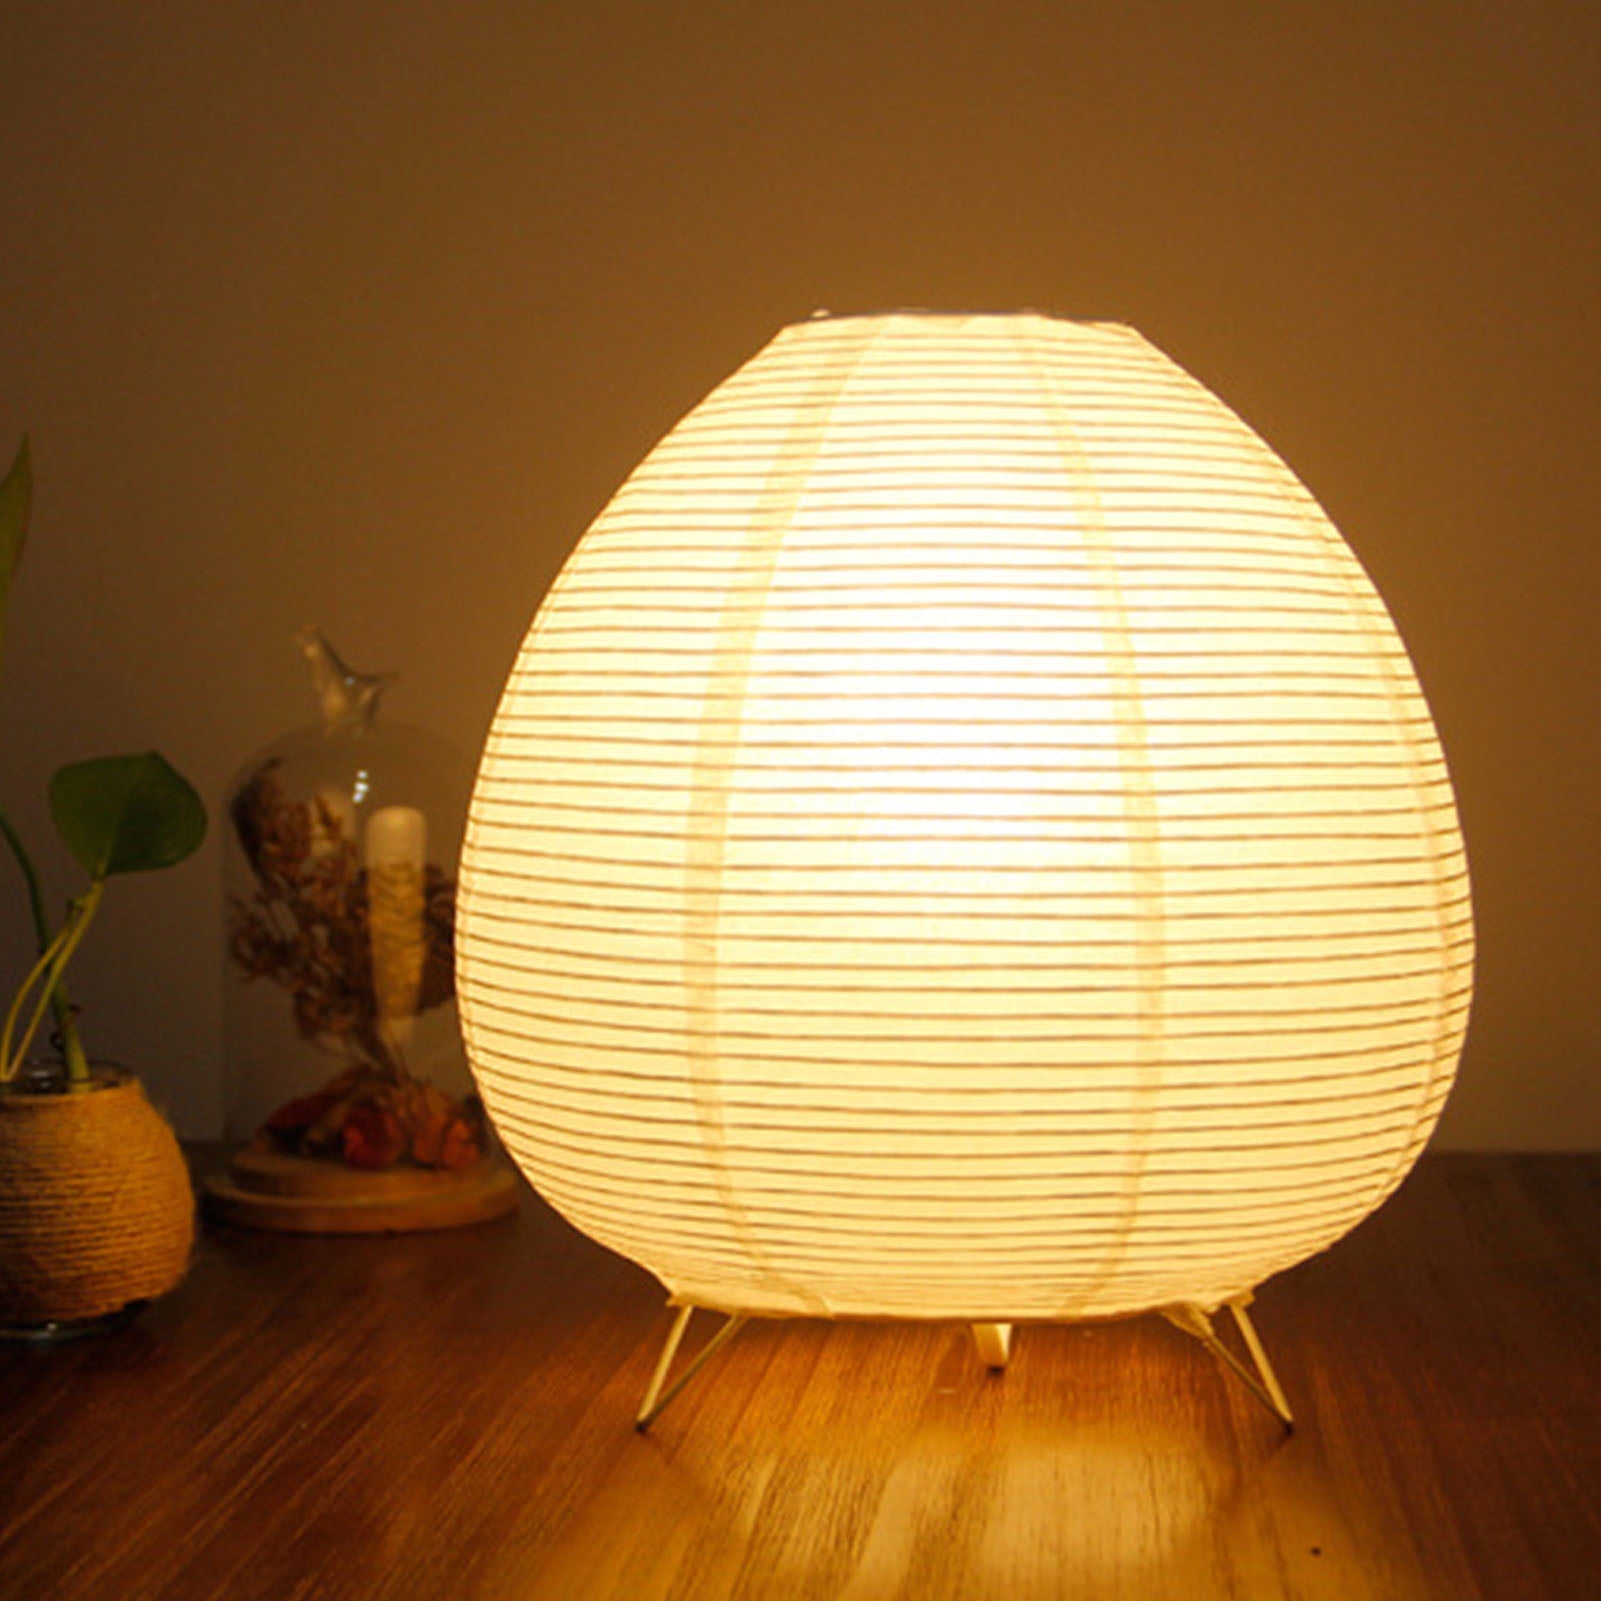 Rice Paper Lamps Give Any Space a Warm Glow—Here Are Some Great